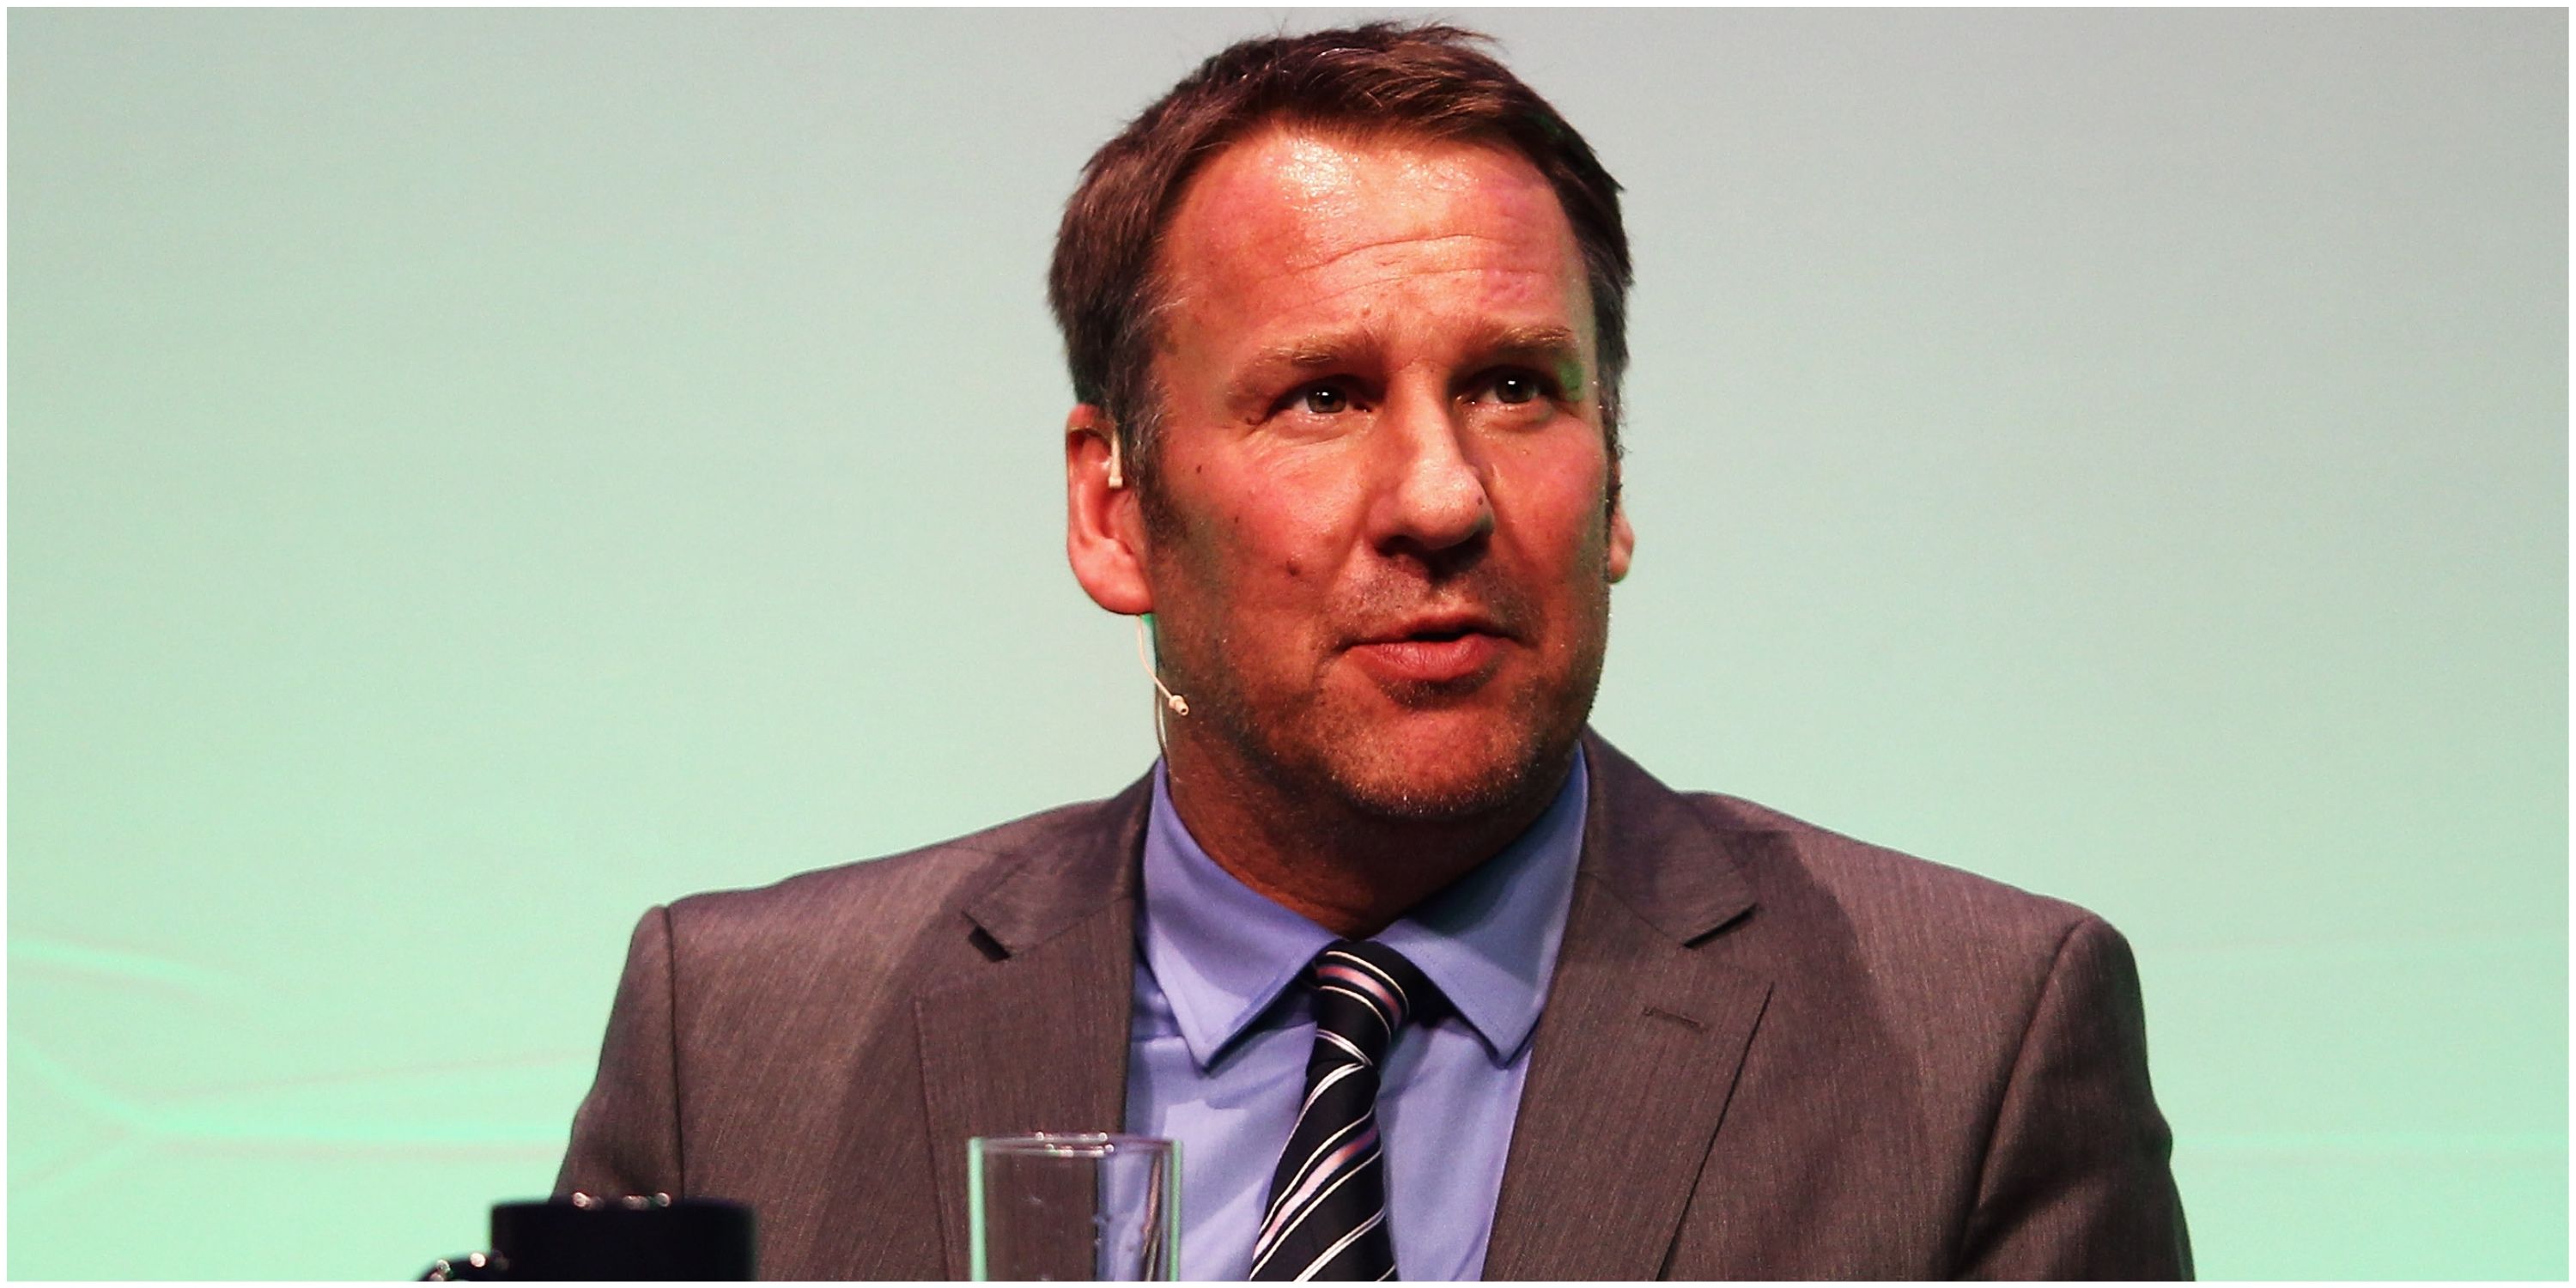 ‘Not good business’ - Paul Merson slams two of Chelsea’s summer transfer deals